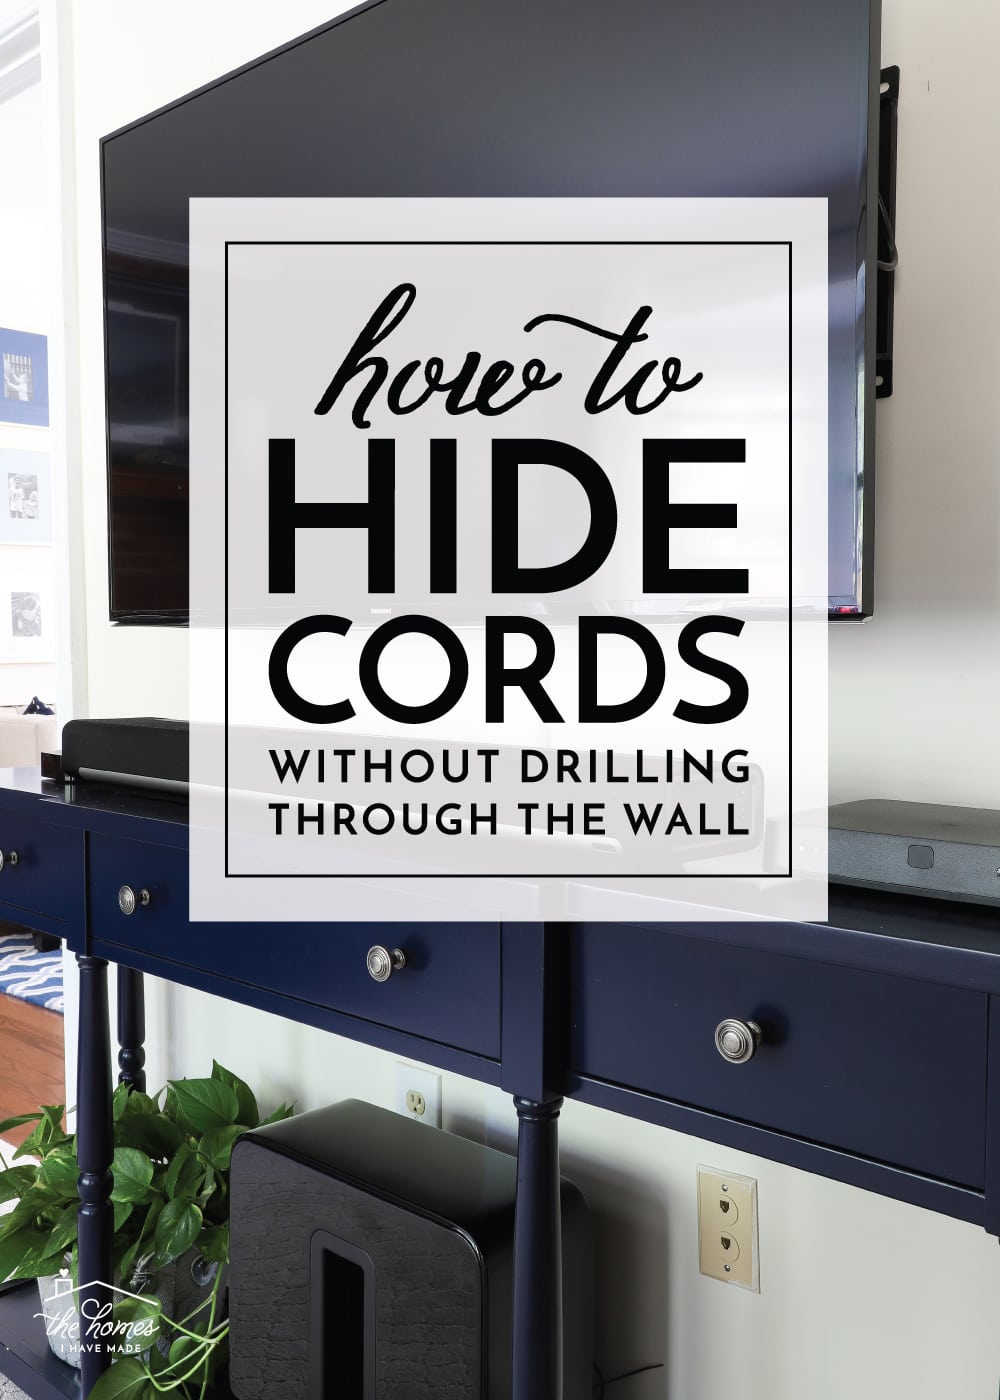 https://thehomesihavemade.com/wp-content/uploads/2020/06/How-to-Hide-Cords_1.jpg